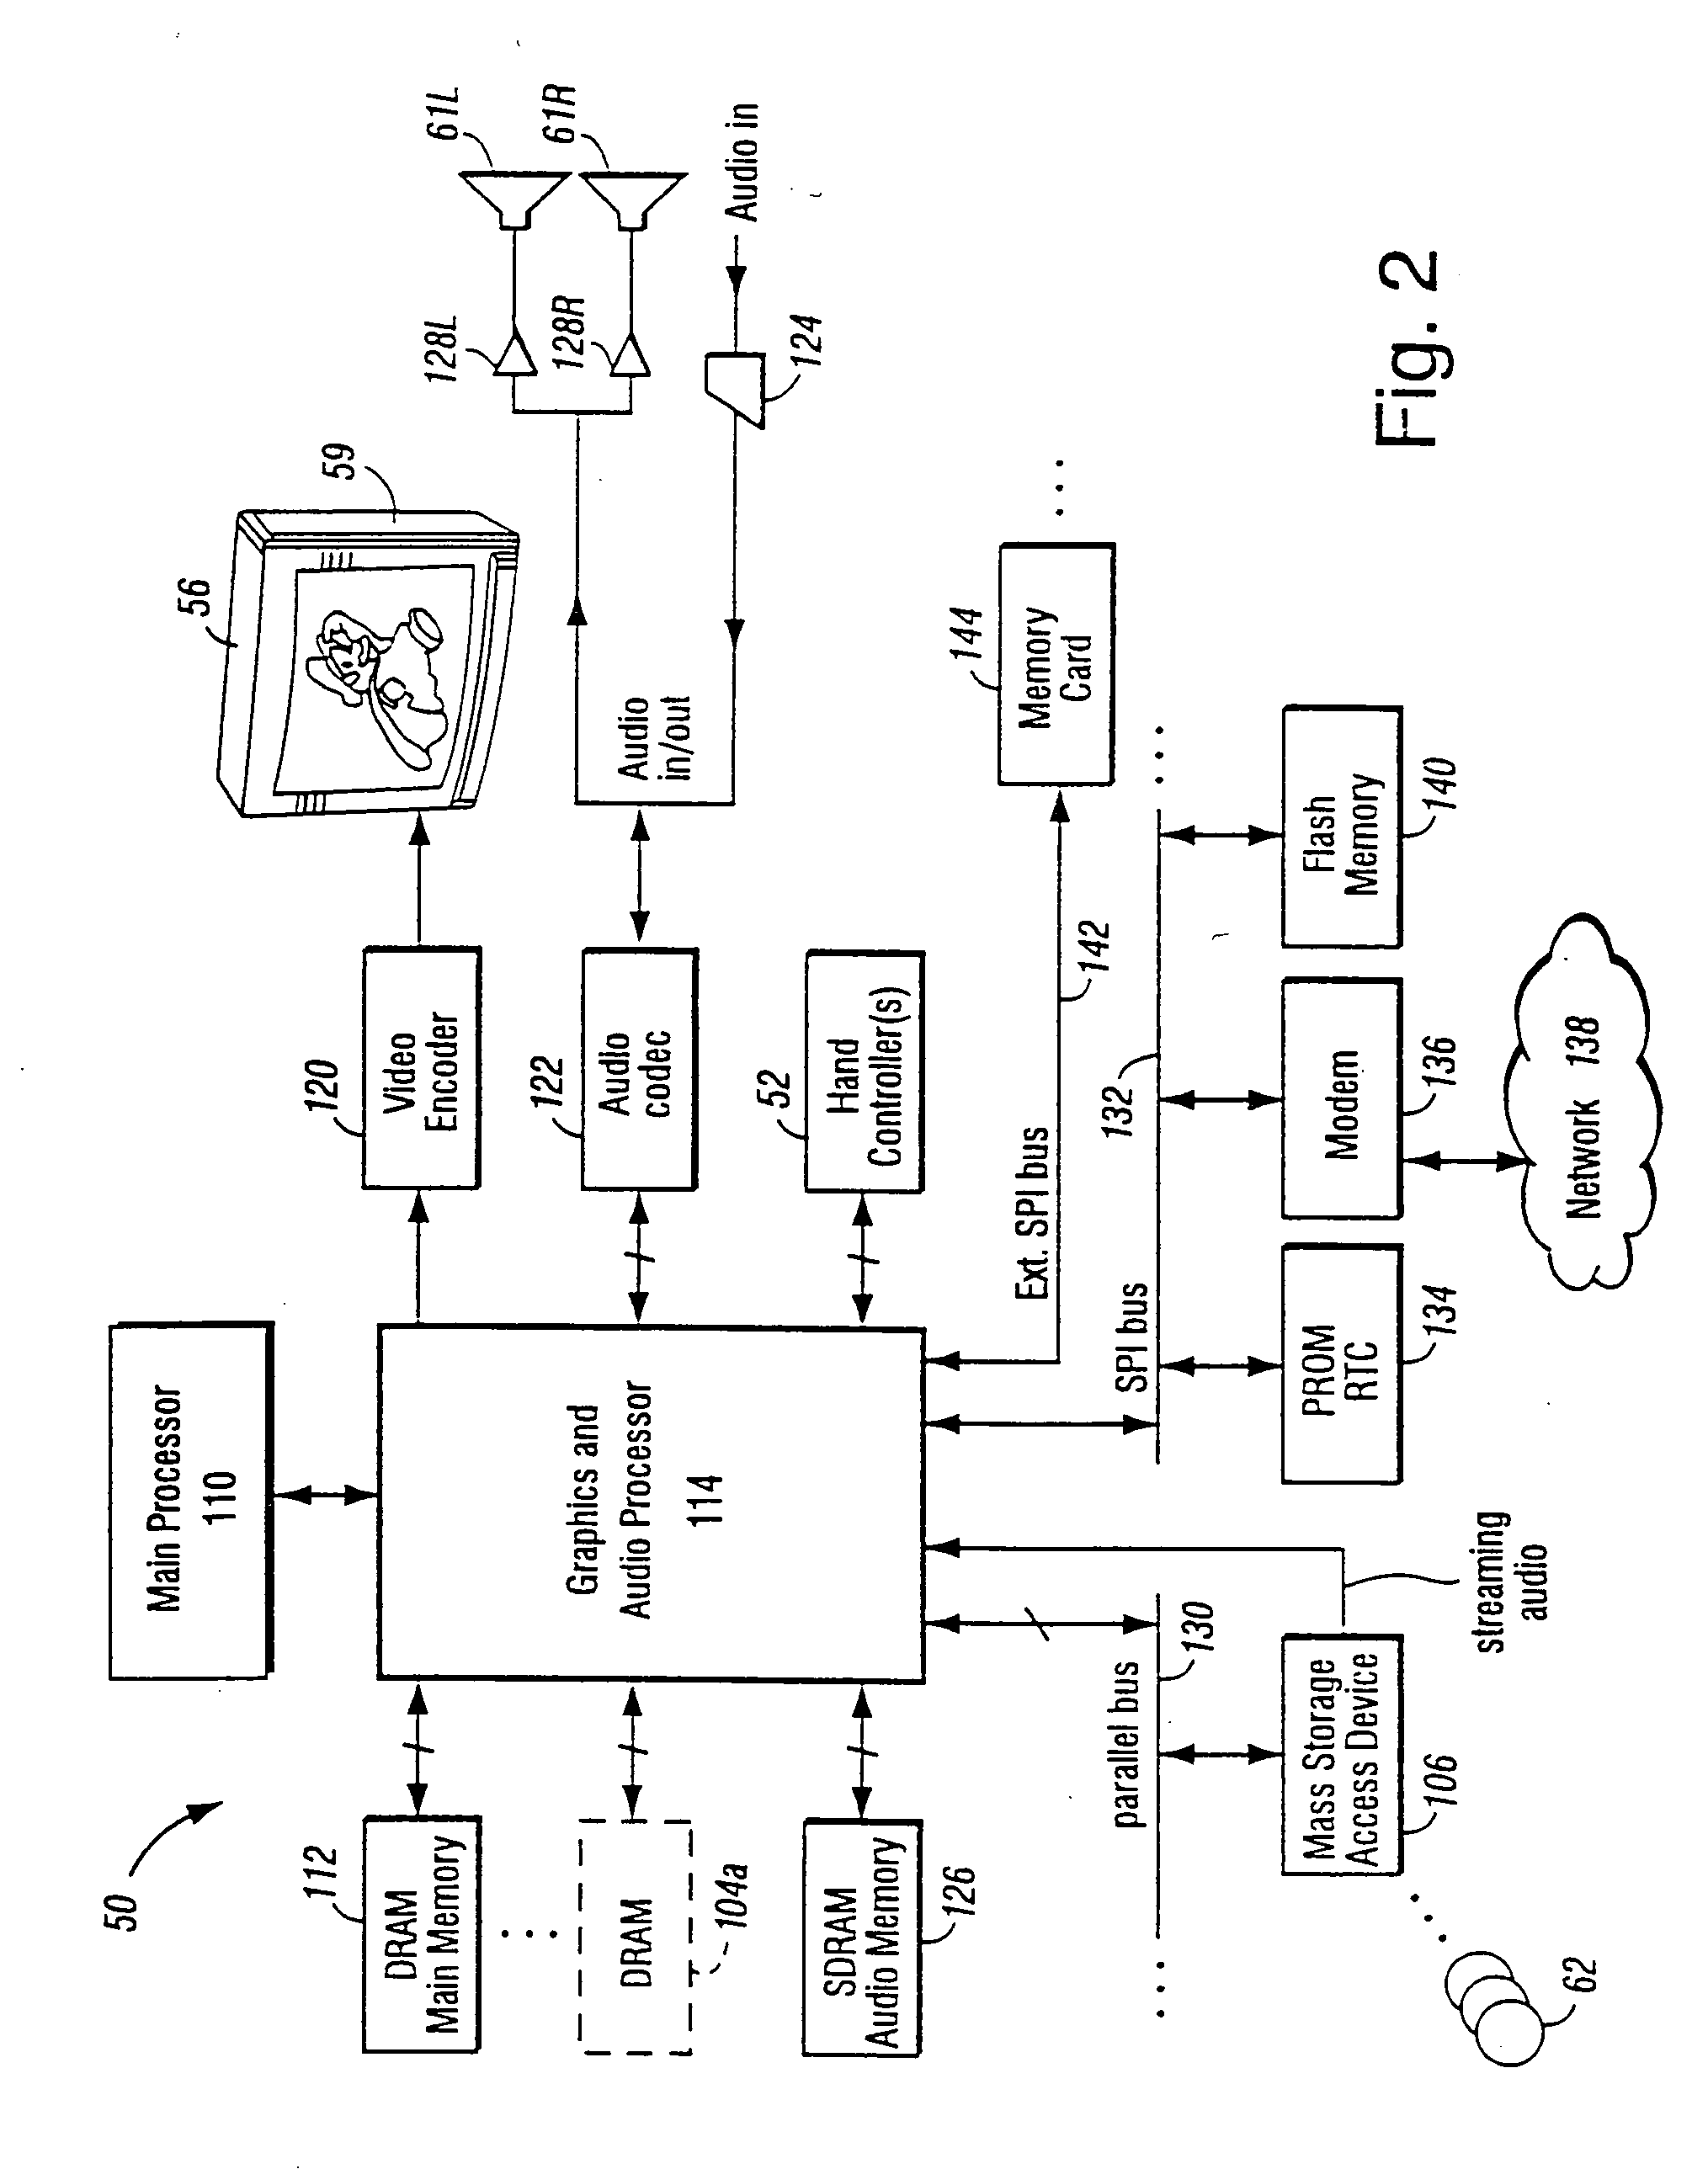 Method and apparatus for buffering graphics data in a graphics system